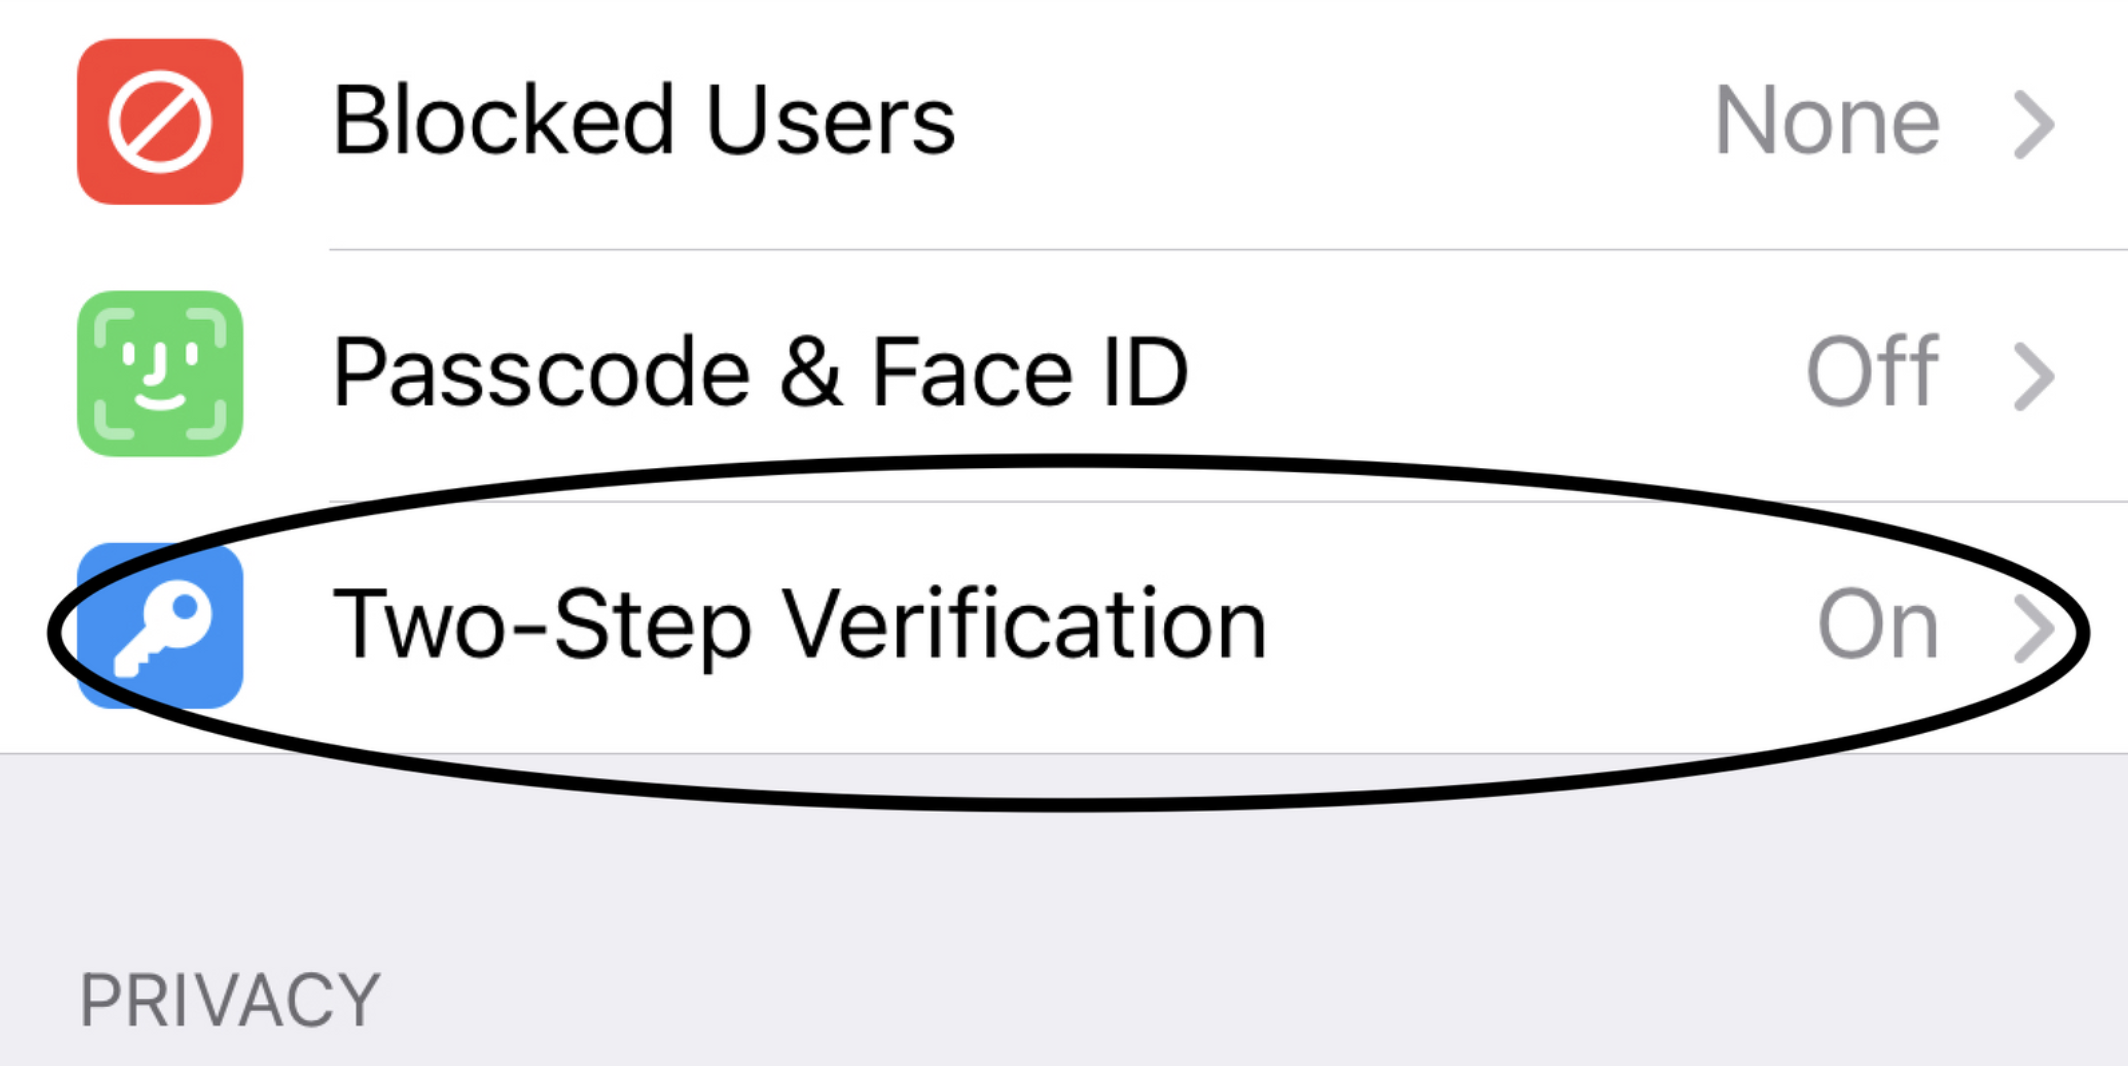 How to setup Multi-Factor Authentication on Telegram